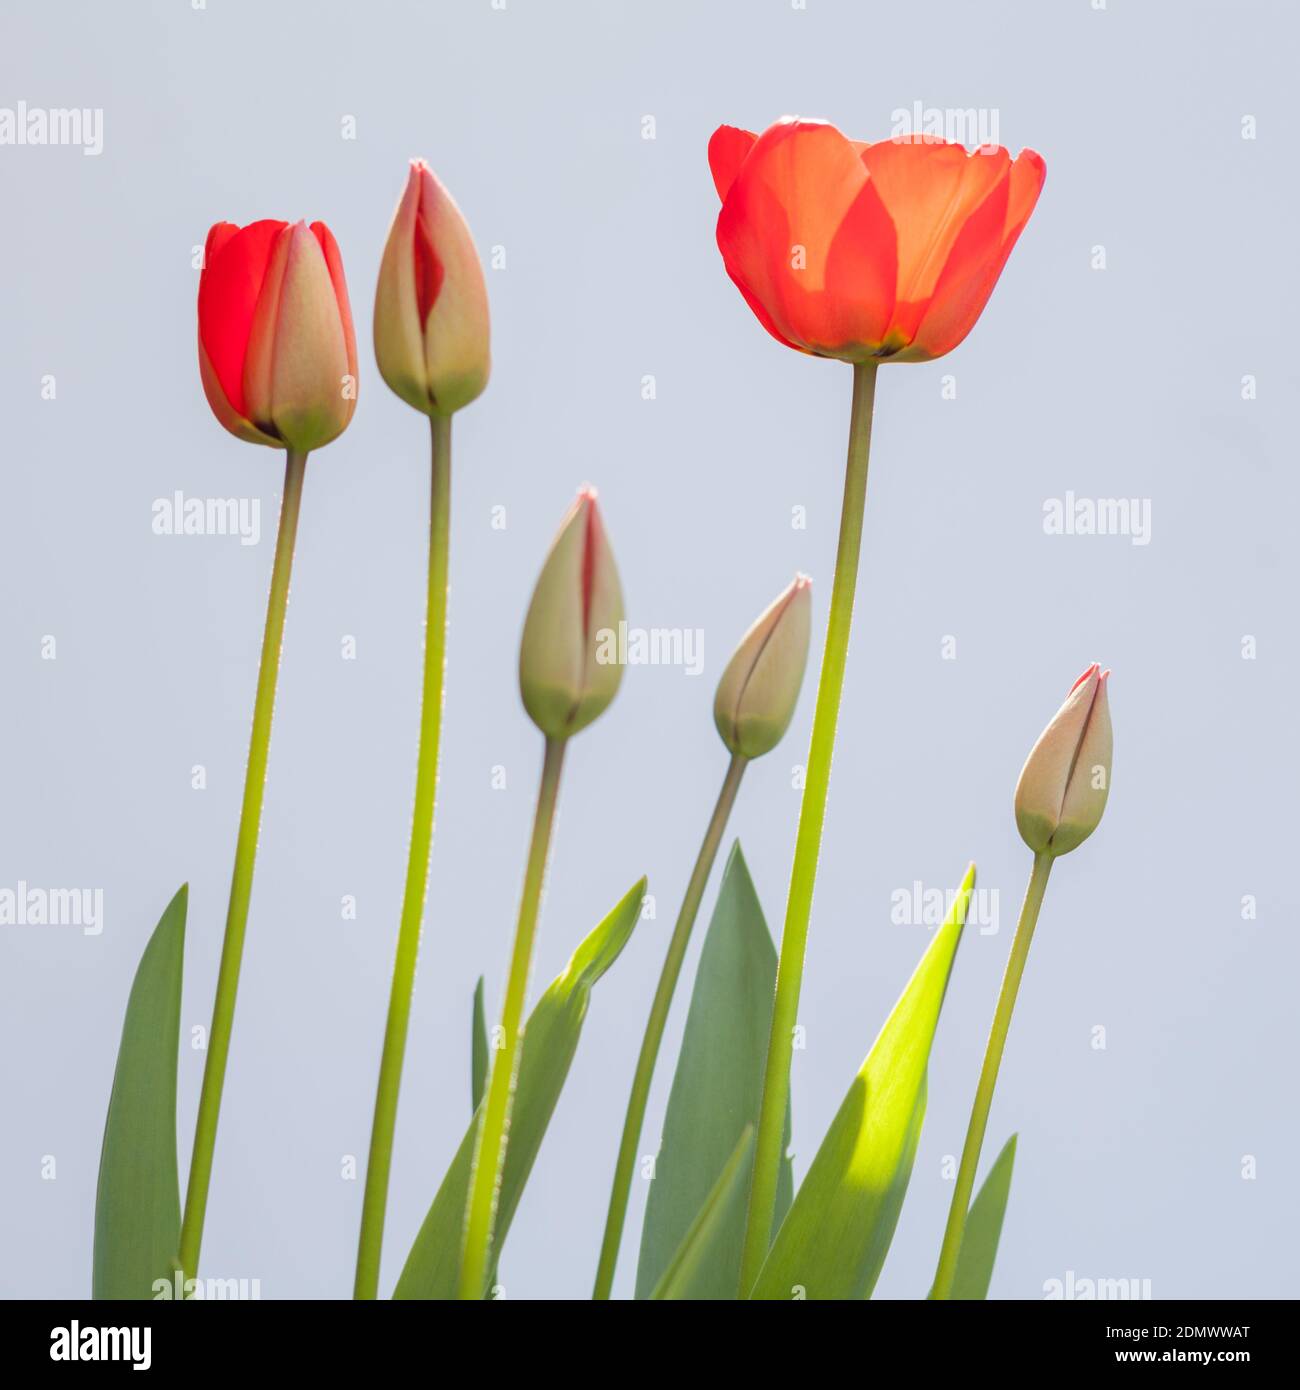 Red Tulips in a garden, UK Stock Photo